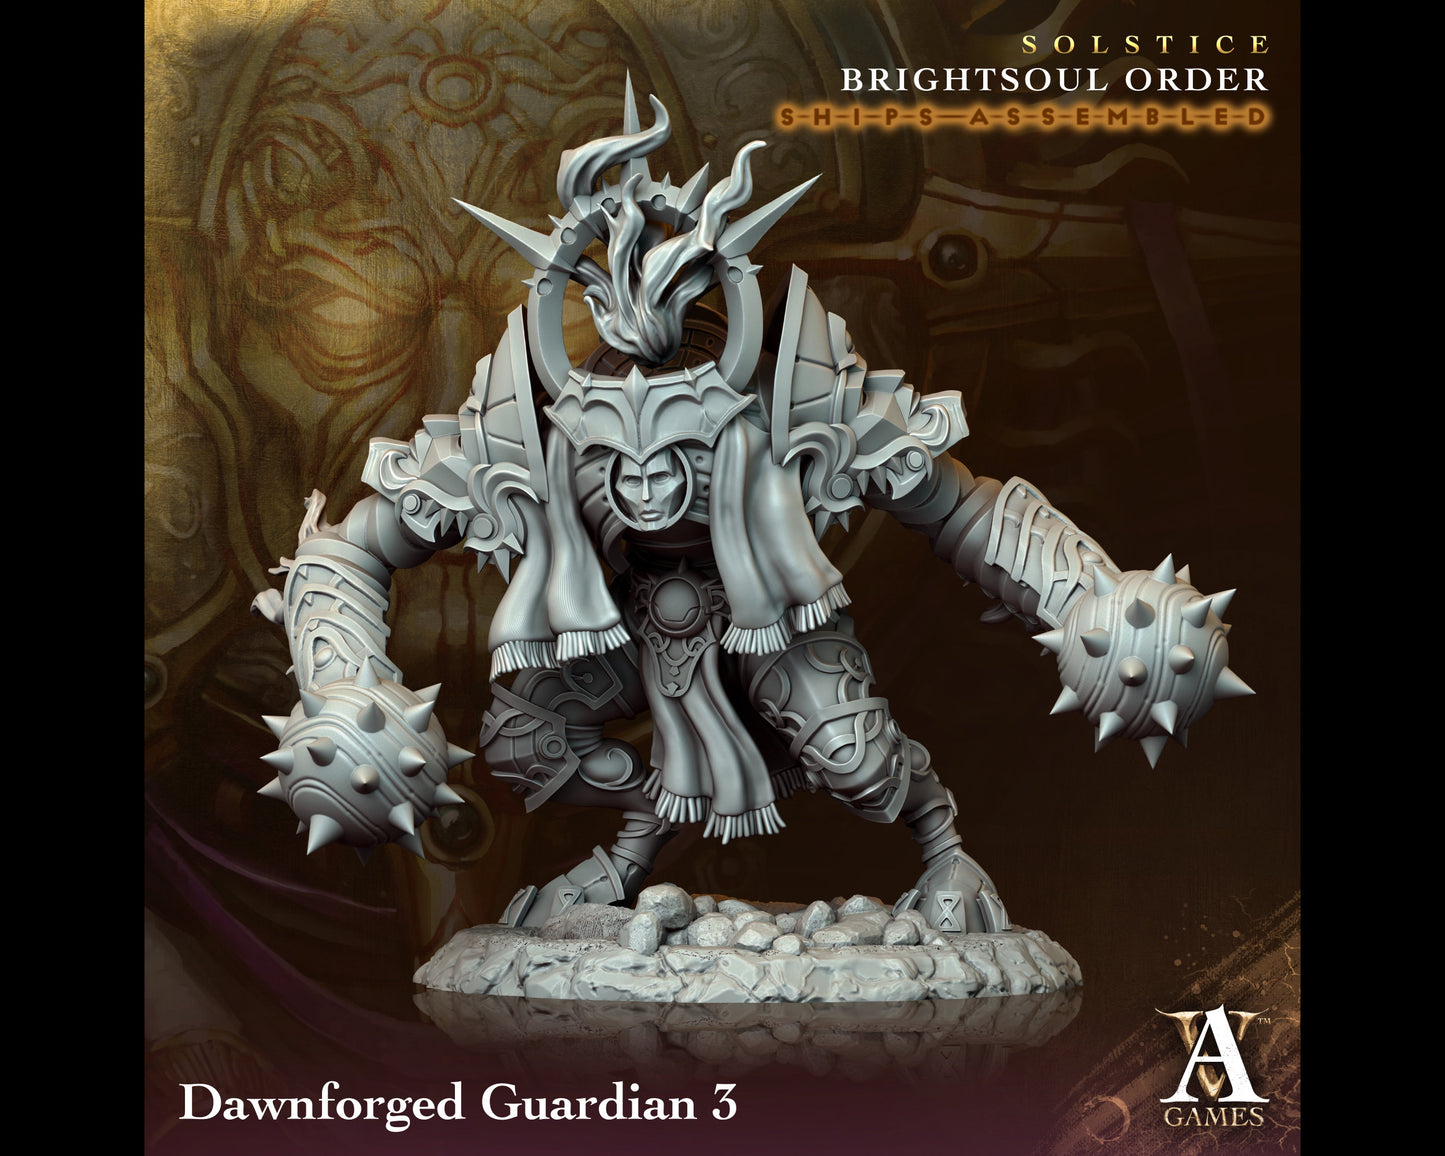 Dawnforged Guardian 3 - Brightsoul Order - Highly Detailed Resin 8k 3D Printed Miniature